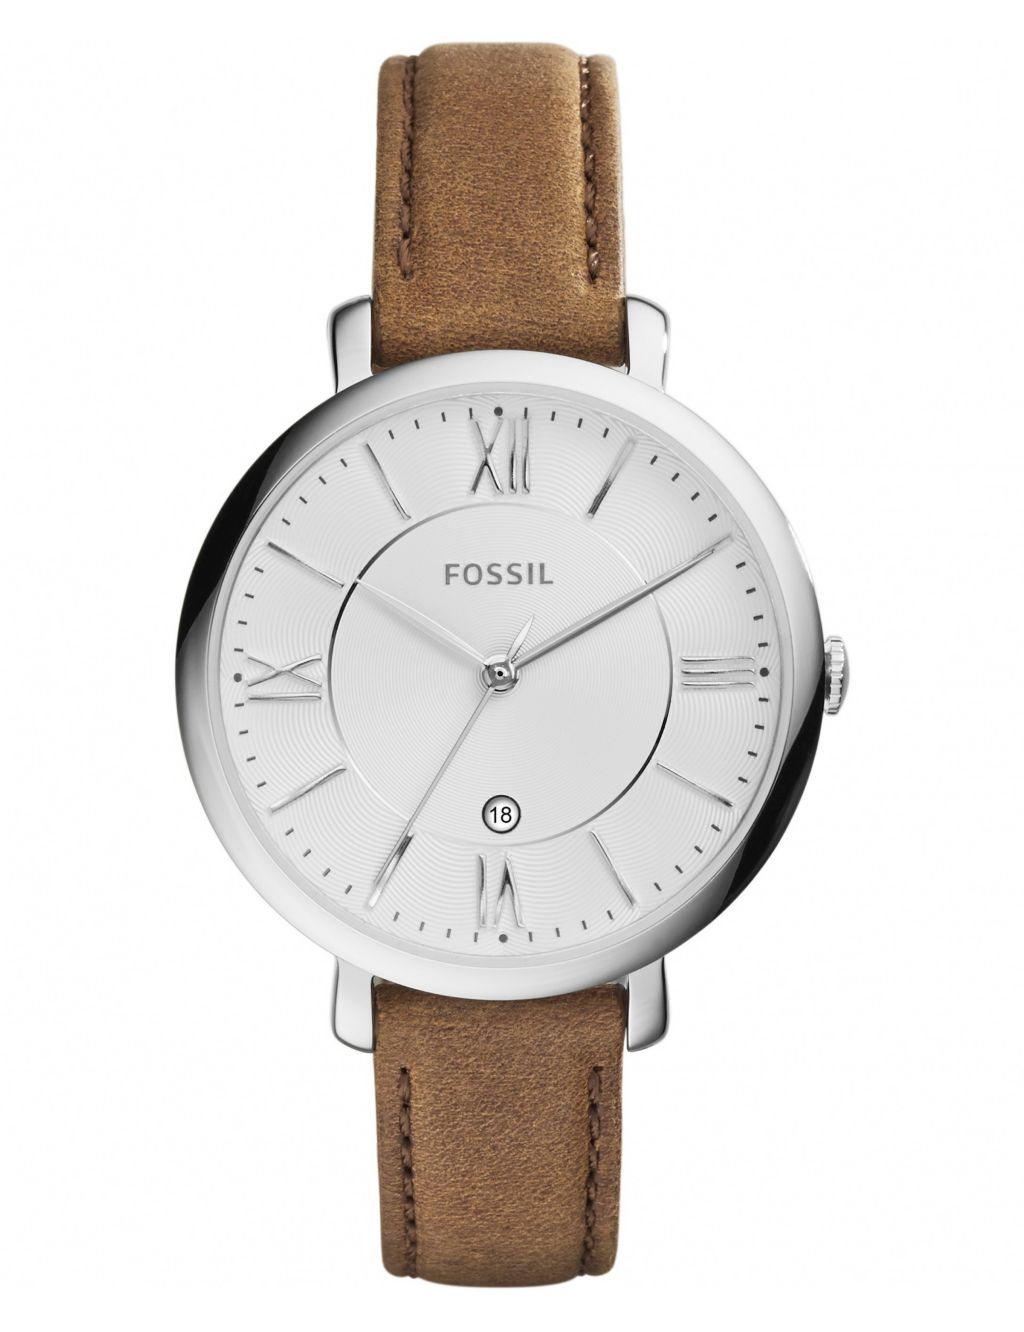 Fossil Jacqueline Brown Leather Watch image 1